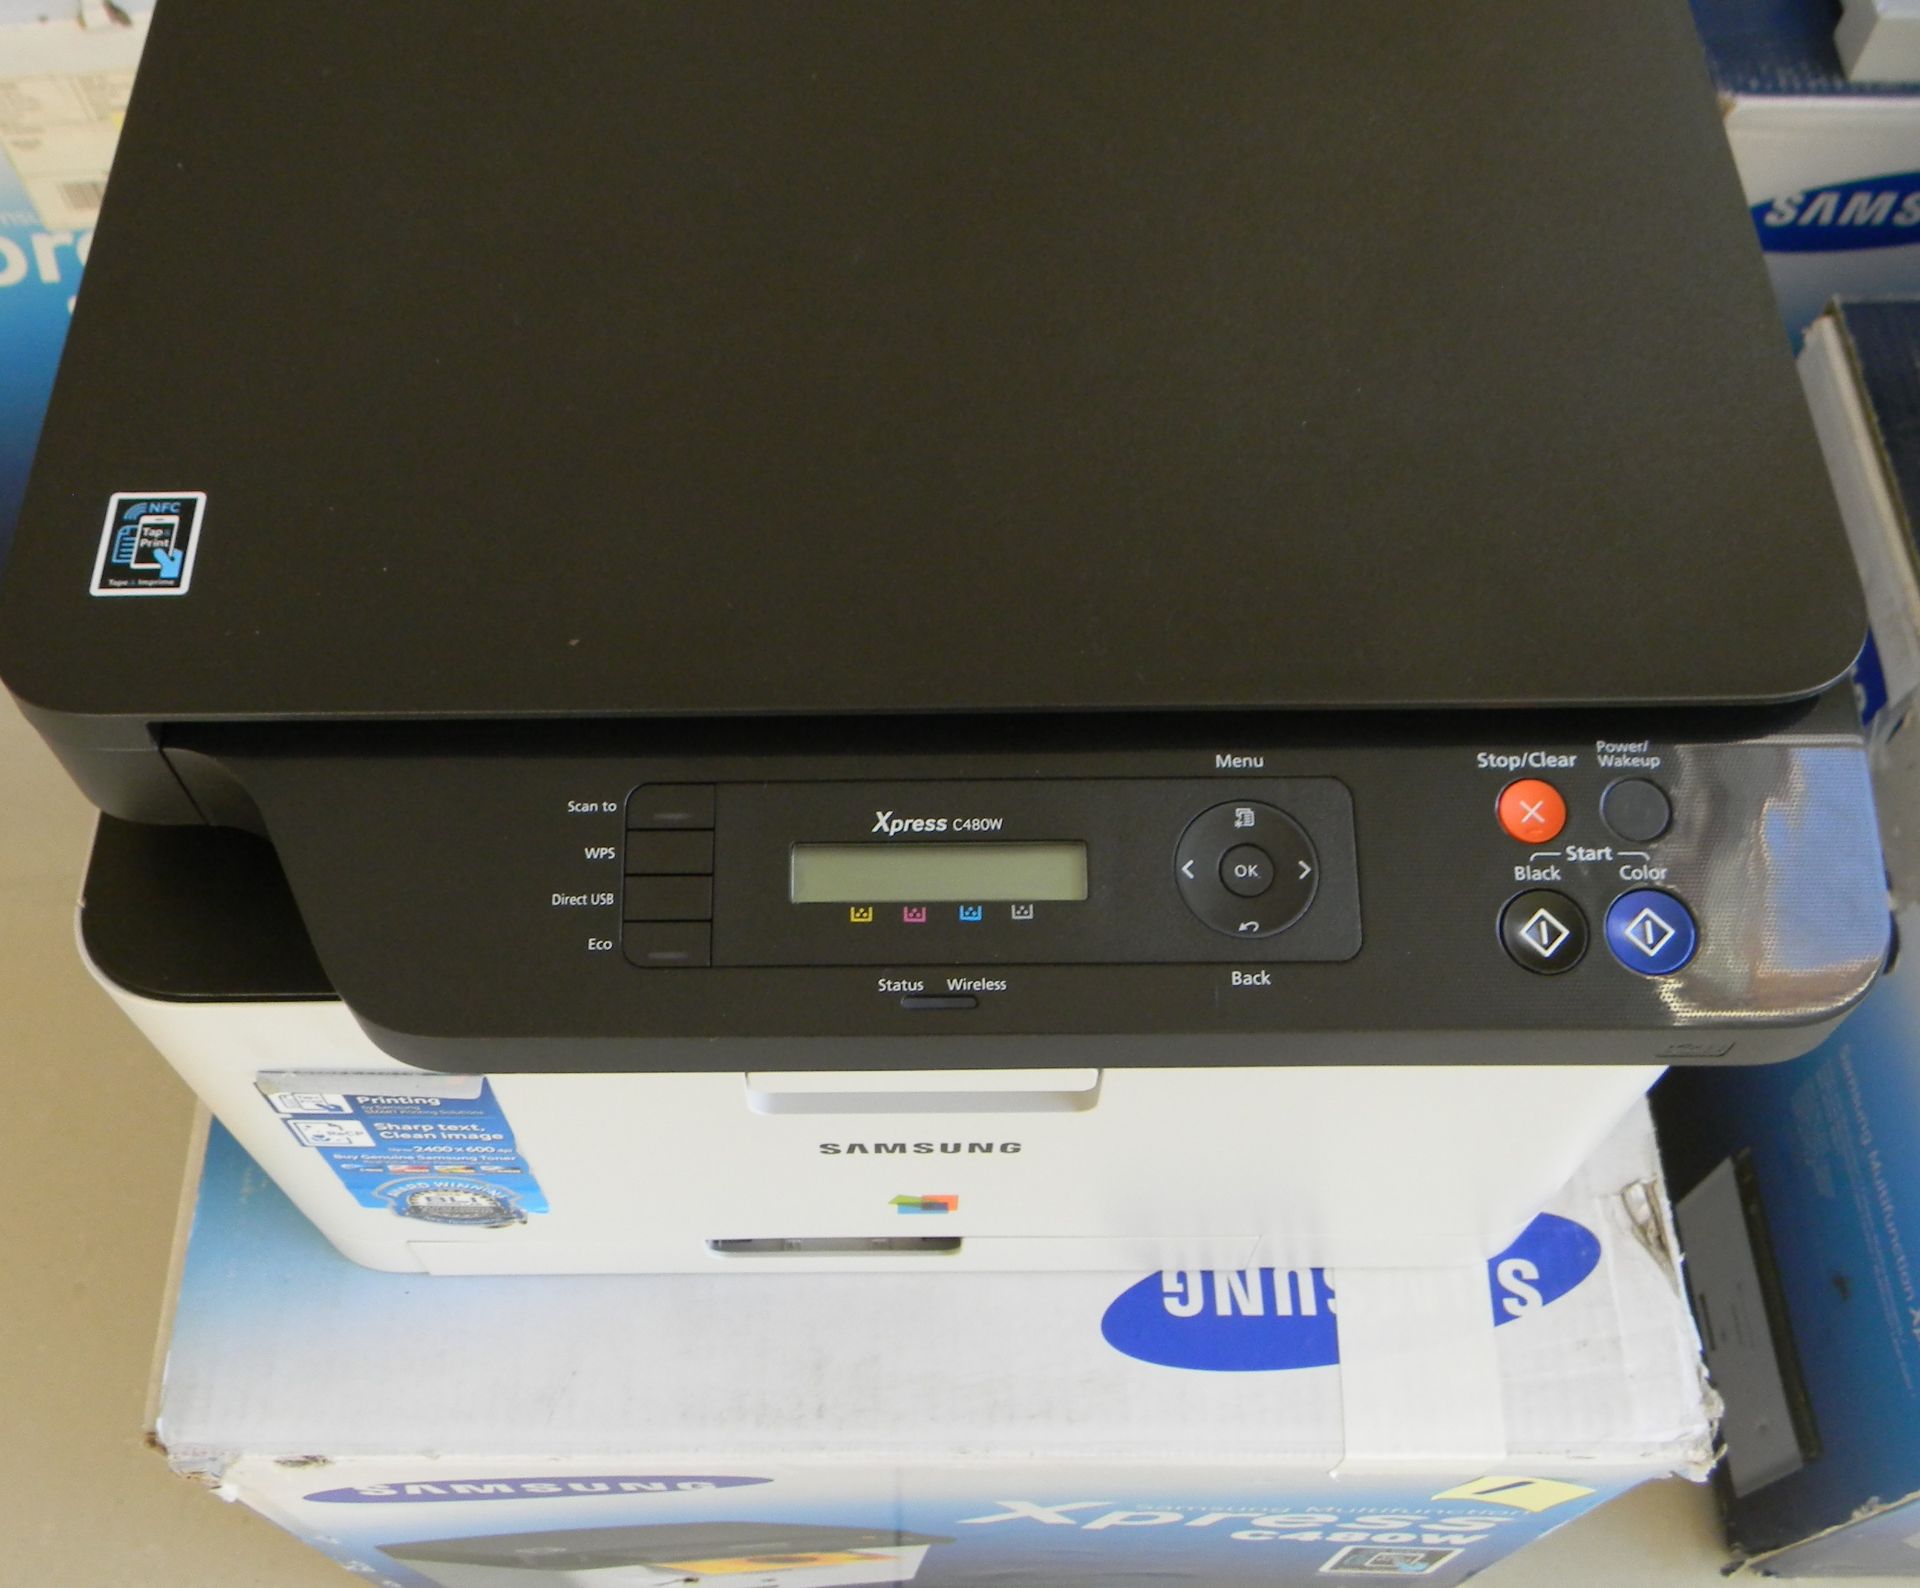 Samsung Xpress C480W Colour Laser Multifunctional Printer (Like New) - Image 2 of 4